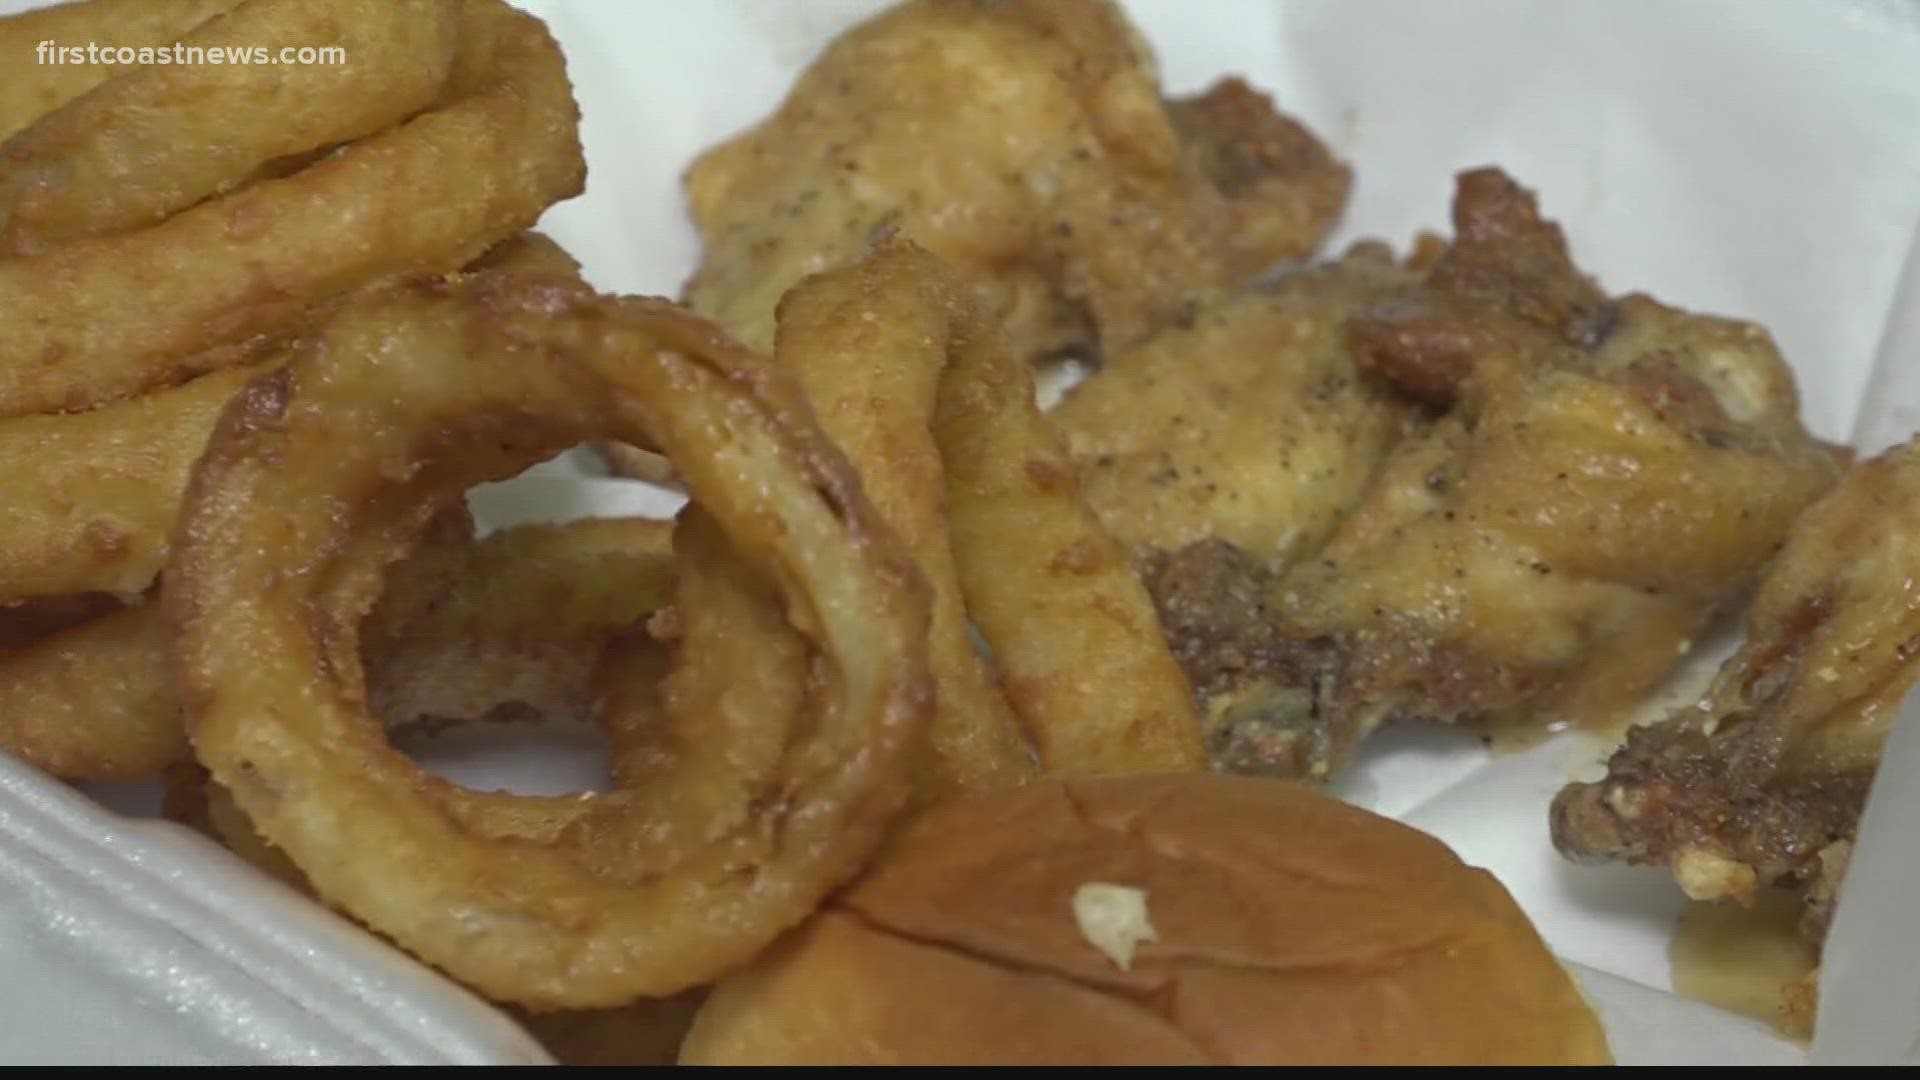 They may be a wings shop, but Duval Wings has more than just wings.